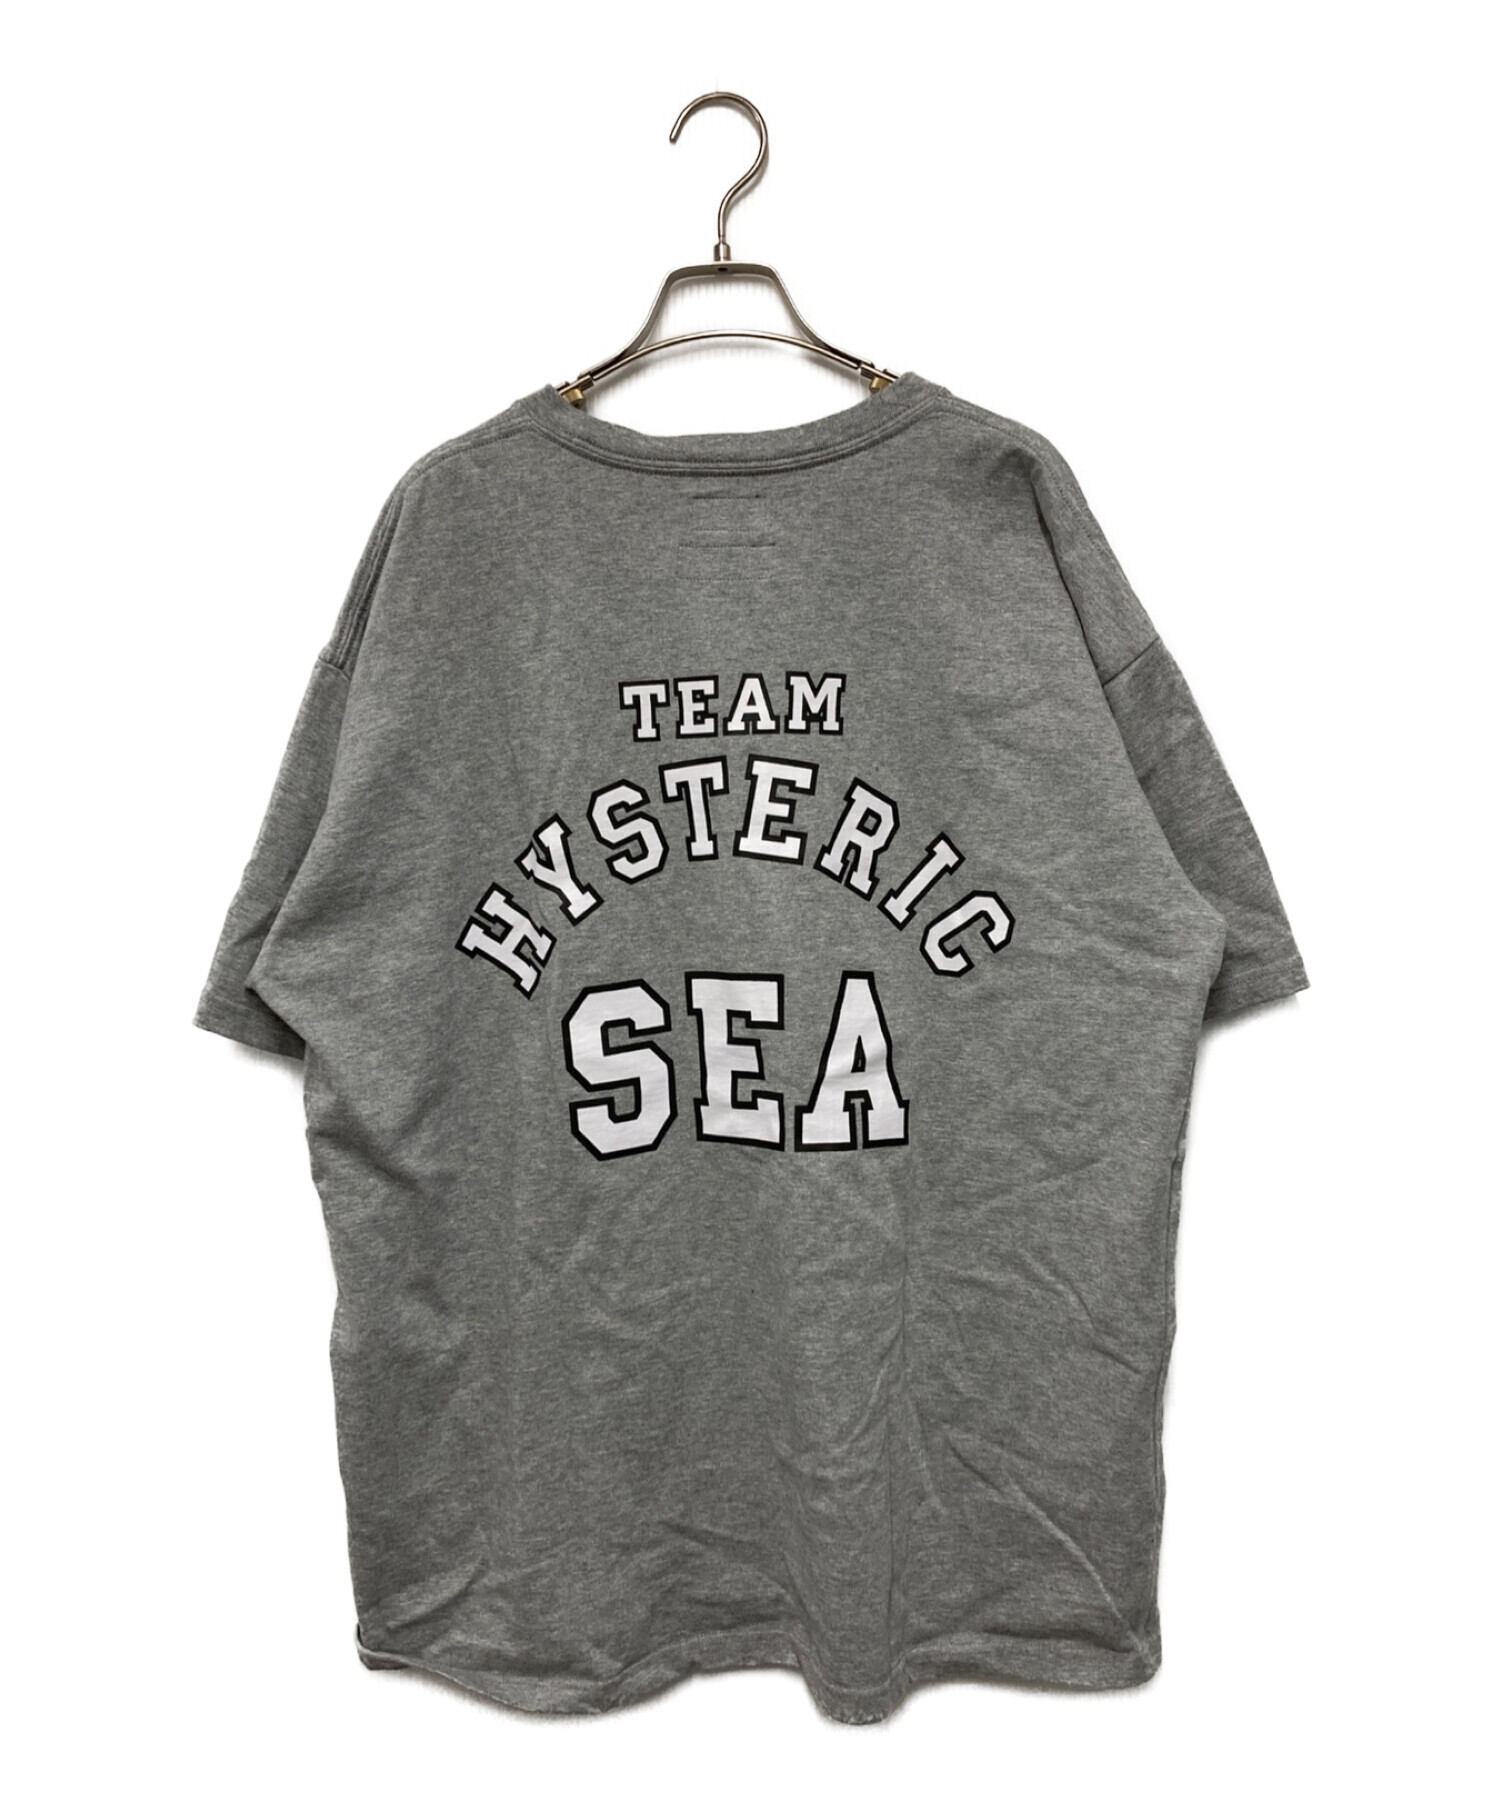 WIND AND SEA × HYSTERIC GLAMOUR Tシャツ